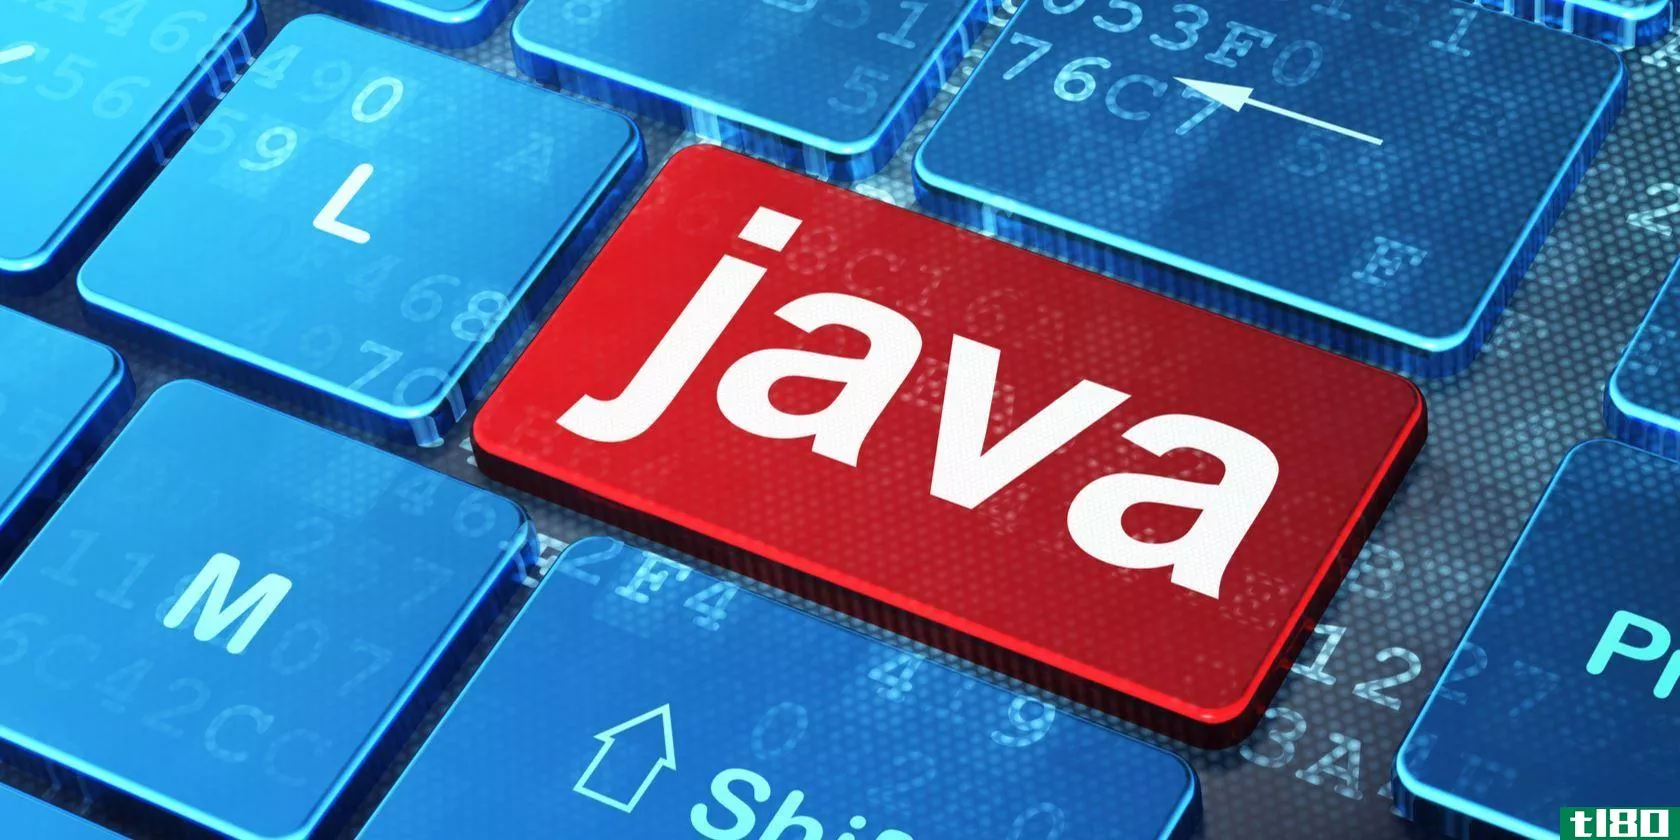 java-programming-concepts-featured